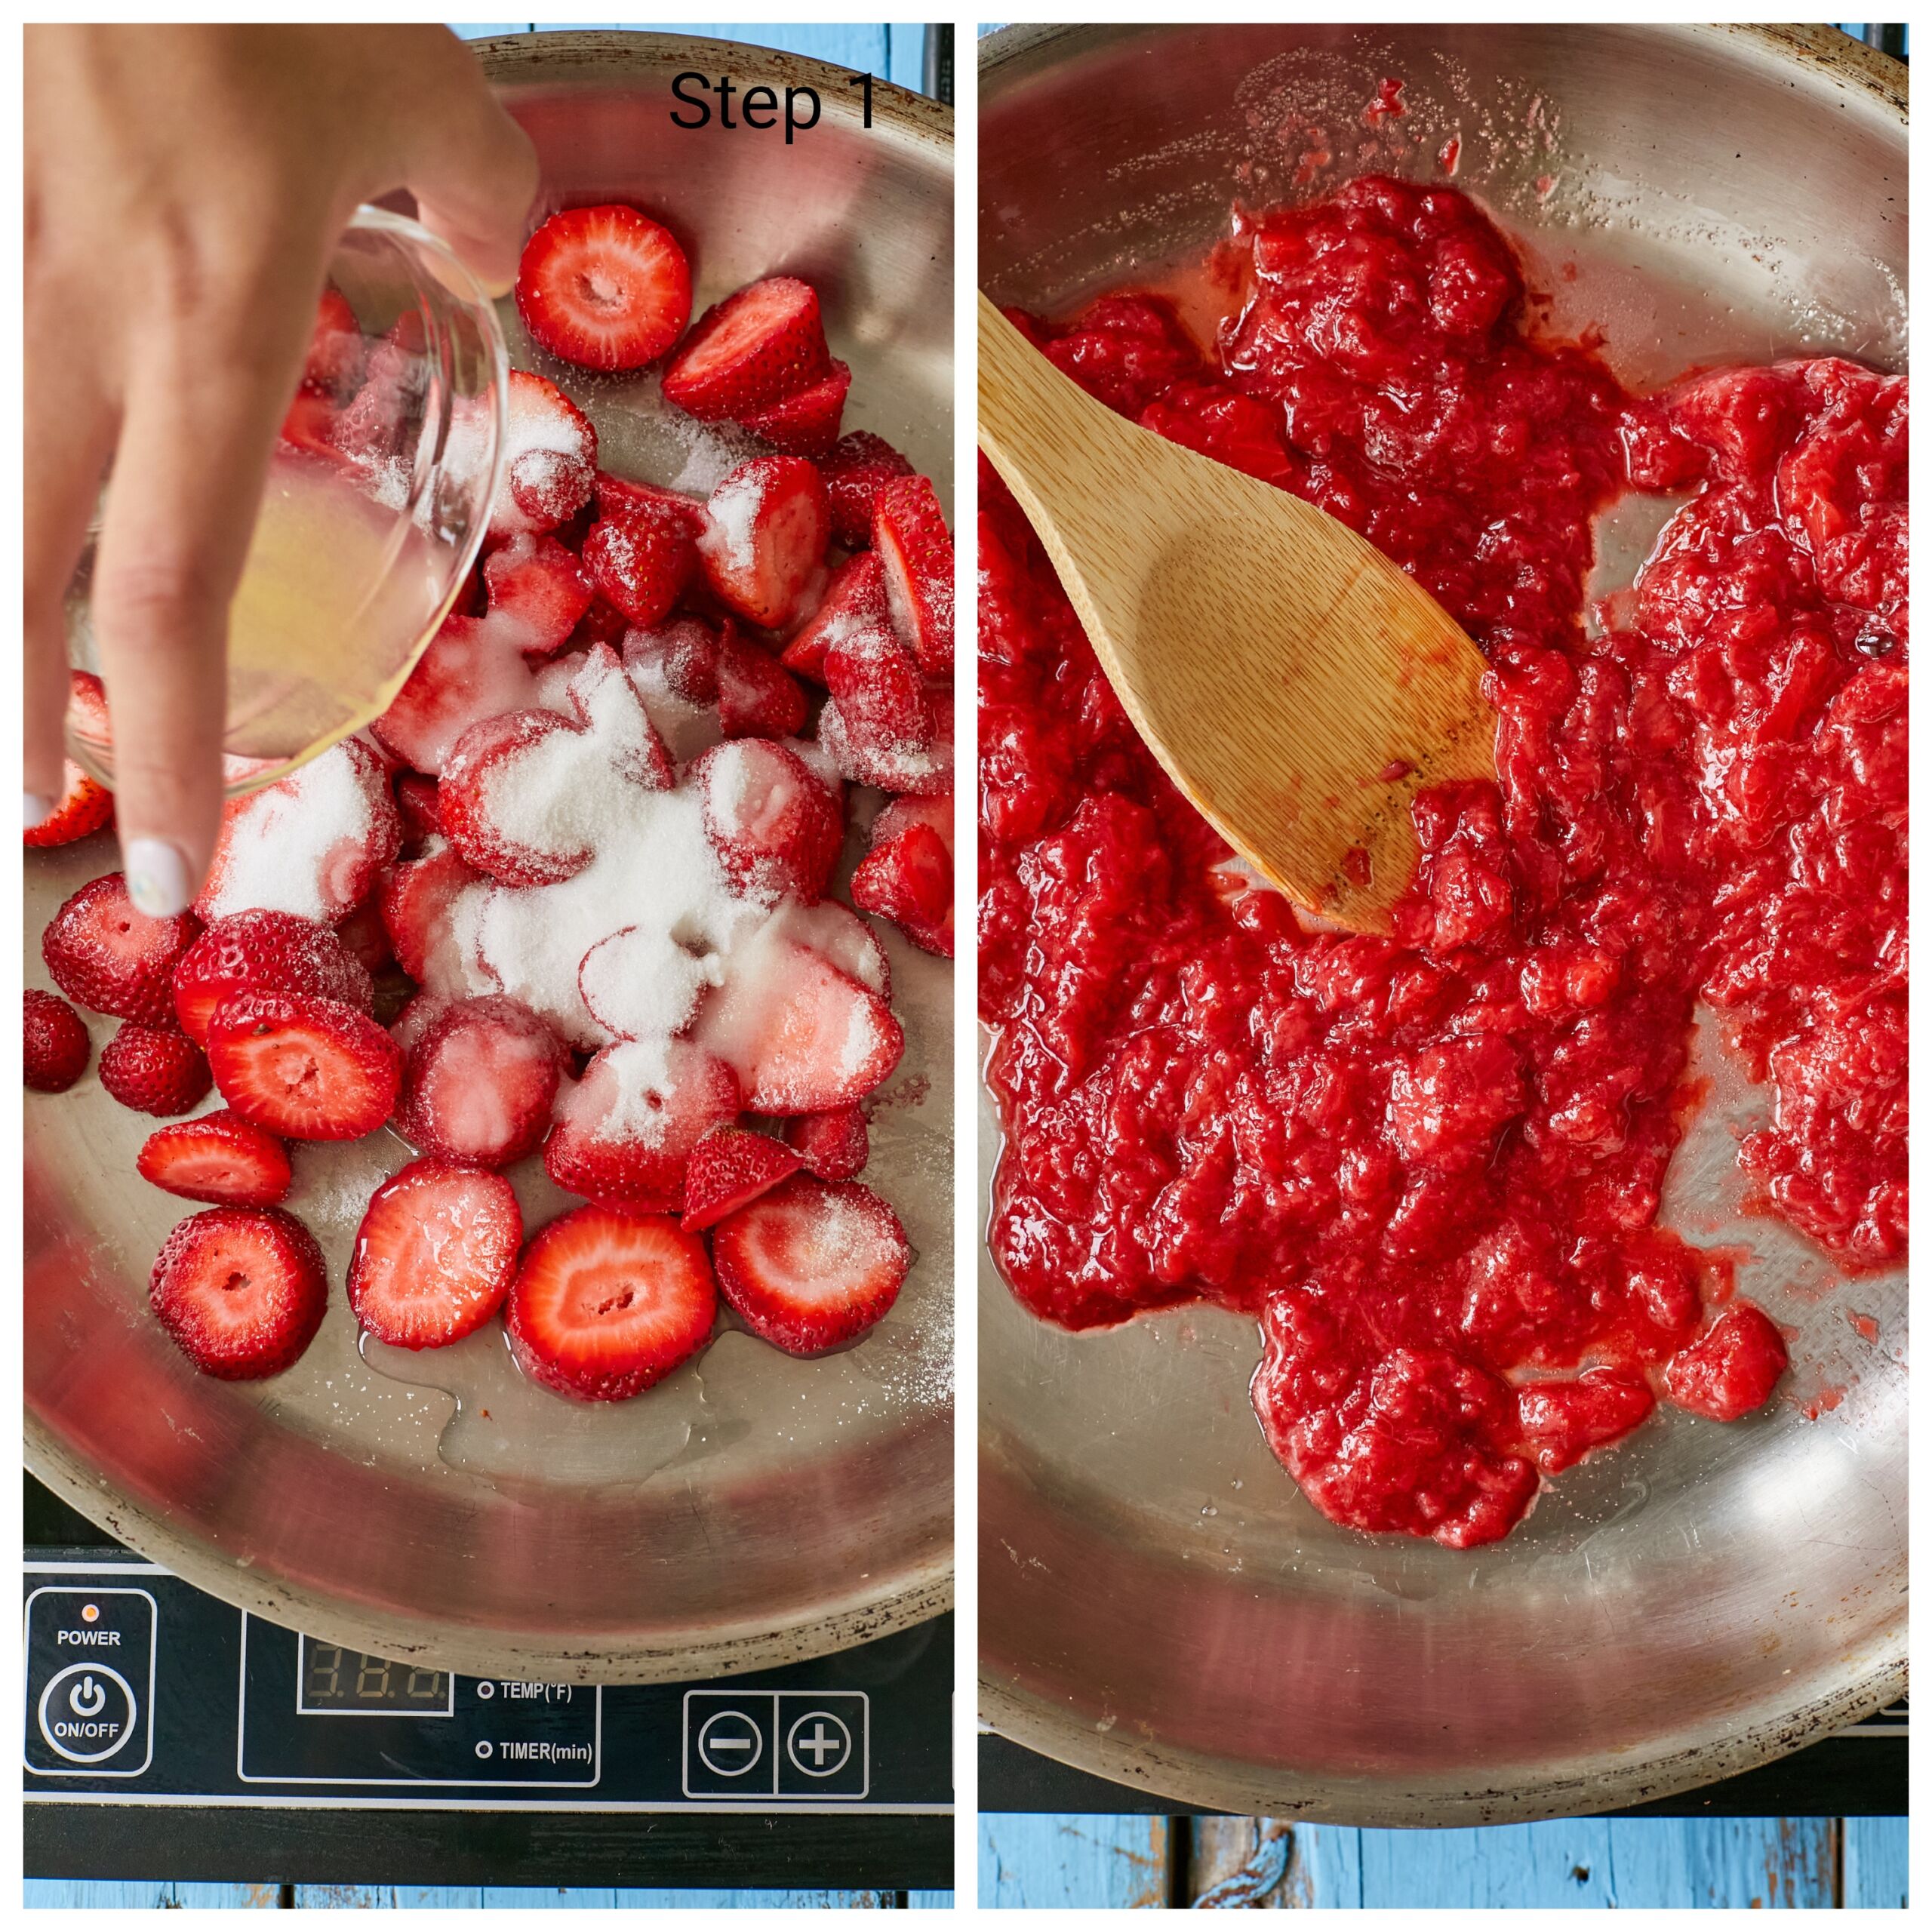 Step-by-step instructions on how to make Strawberry Cheesecake Ice Cream, step1: cook strawberries, ¼ cup (20 oz/57 g) sugar, and 1 tablespoon of lemon juice for about 10 minutes until strawberries break down and get thick and jammy. Mash up any remaining large berry pieces.